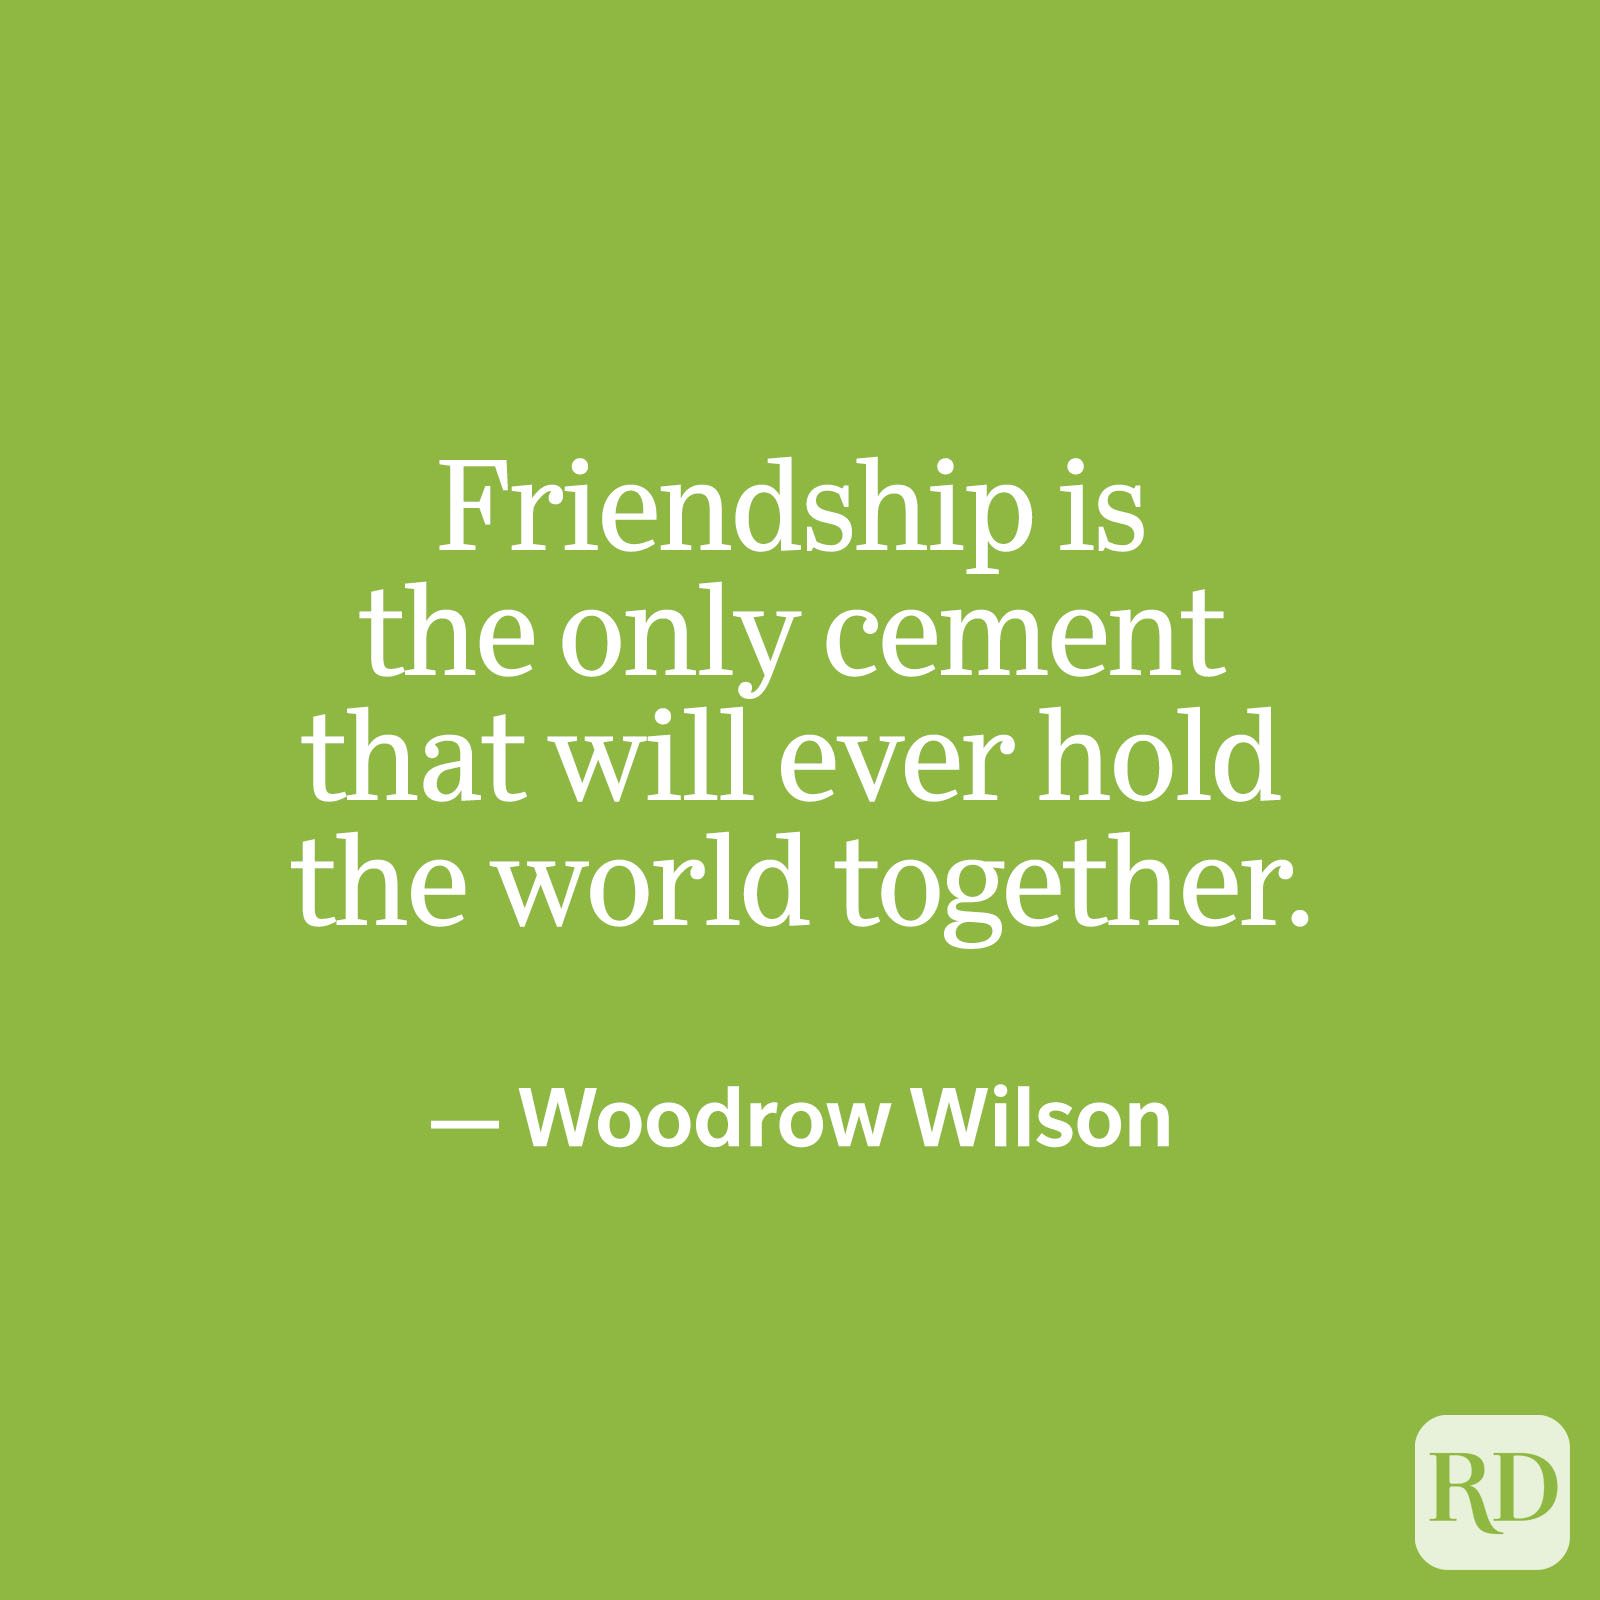 35 Beautiful Quotes About the Meaning of Friendship - A Thousand Lights  Friendship  quotes from movies, Friend love quotes, Meaningful friendship quotes